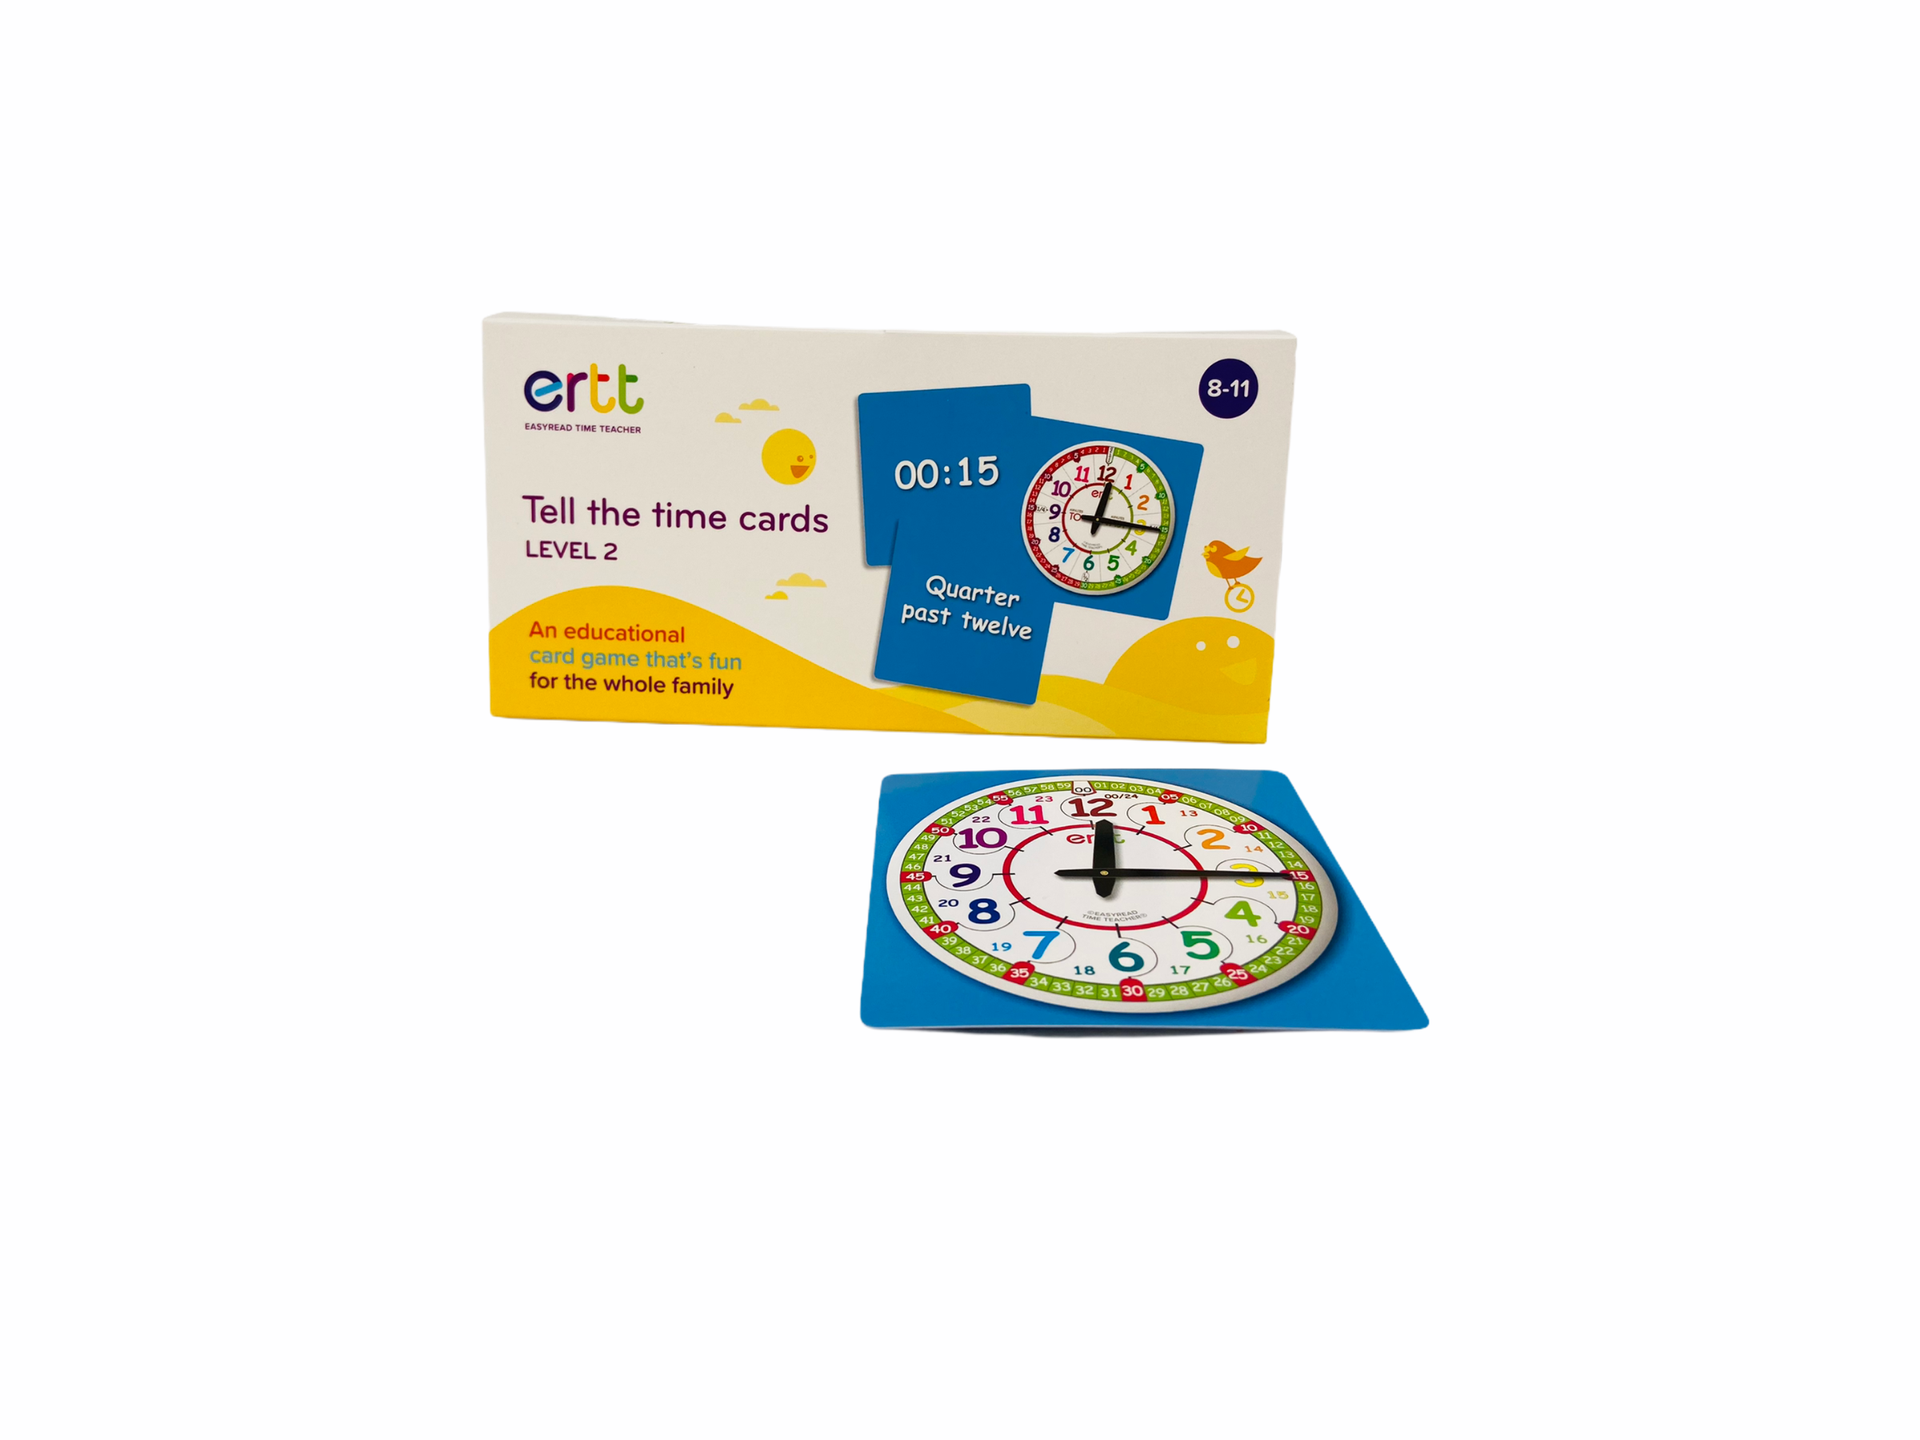 the ERTT Tell The Time Cards - Level 2 on display with blue card in front of box